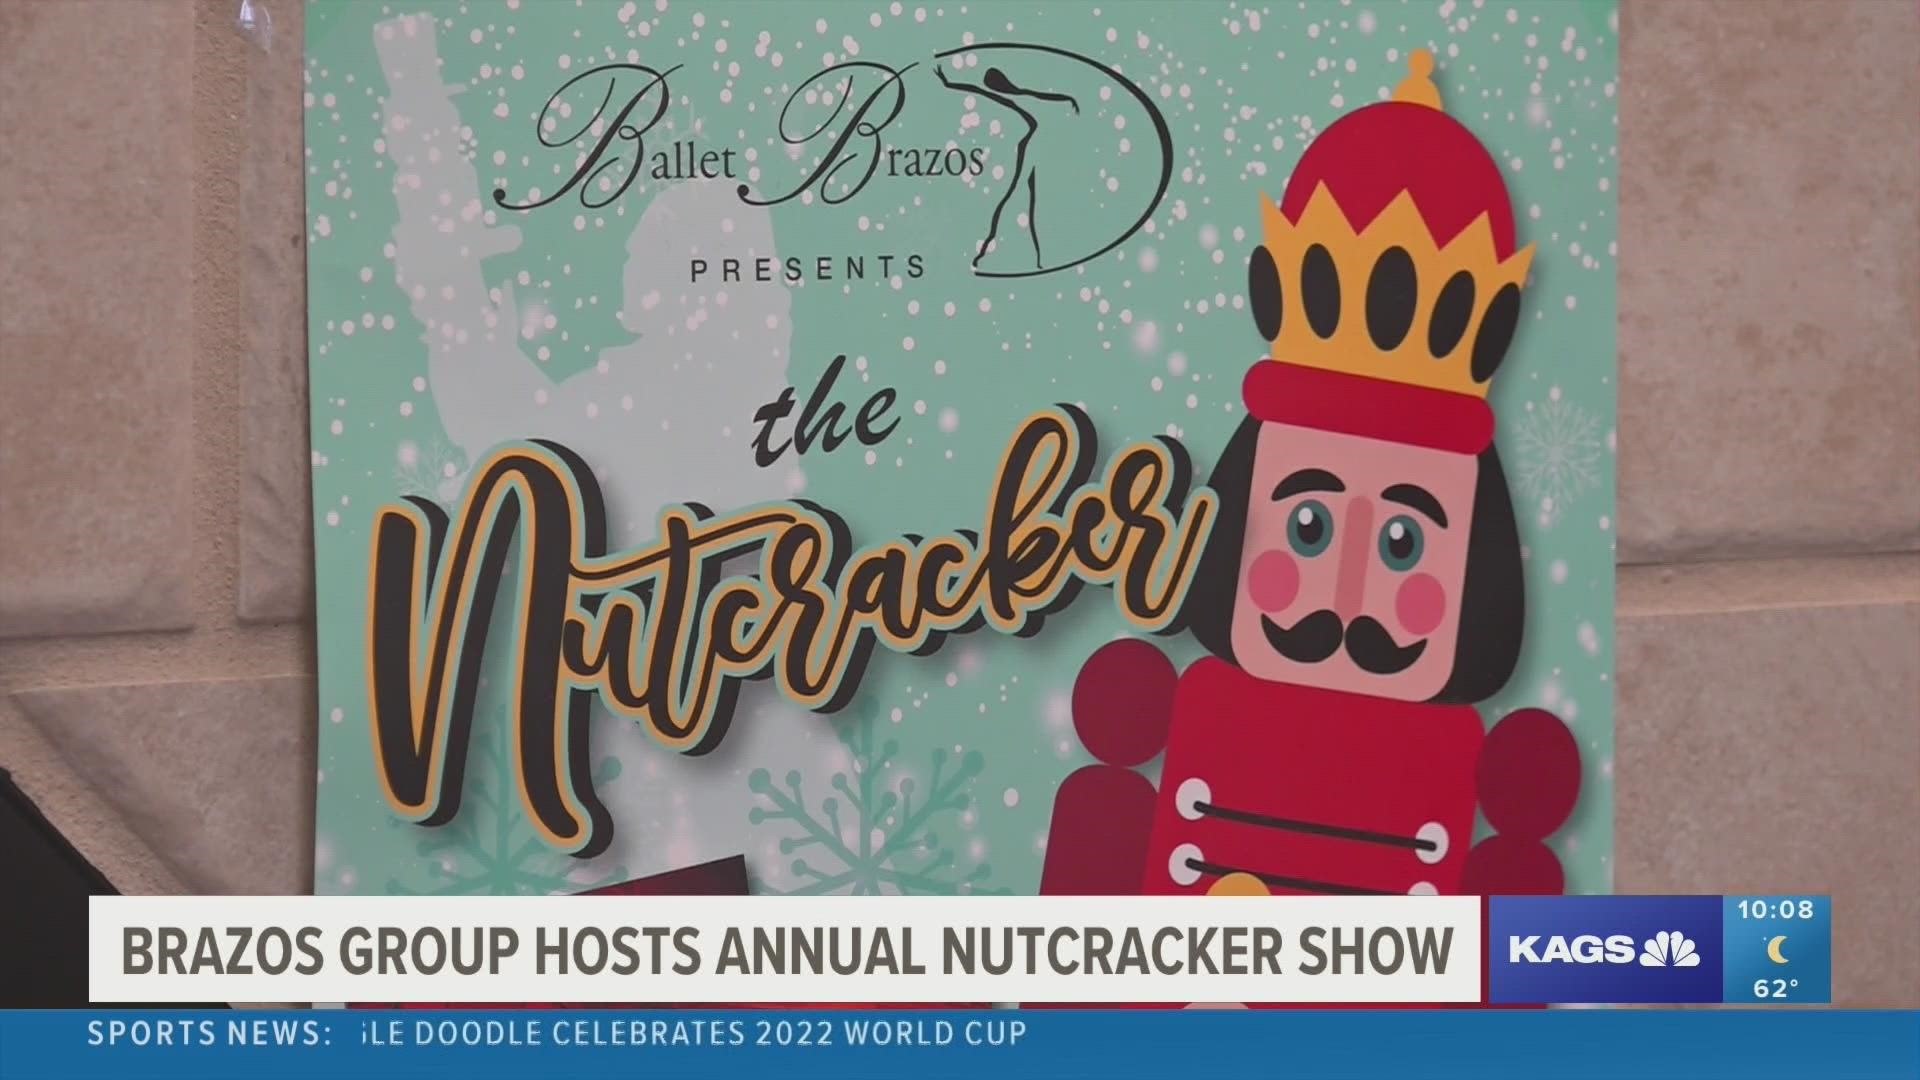 In the season of sugar plum fairies and dancing mice, the Brazos Valley Ballet is putting on their 11th annual nutcracker show.